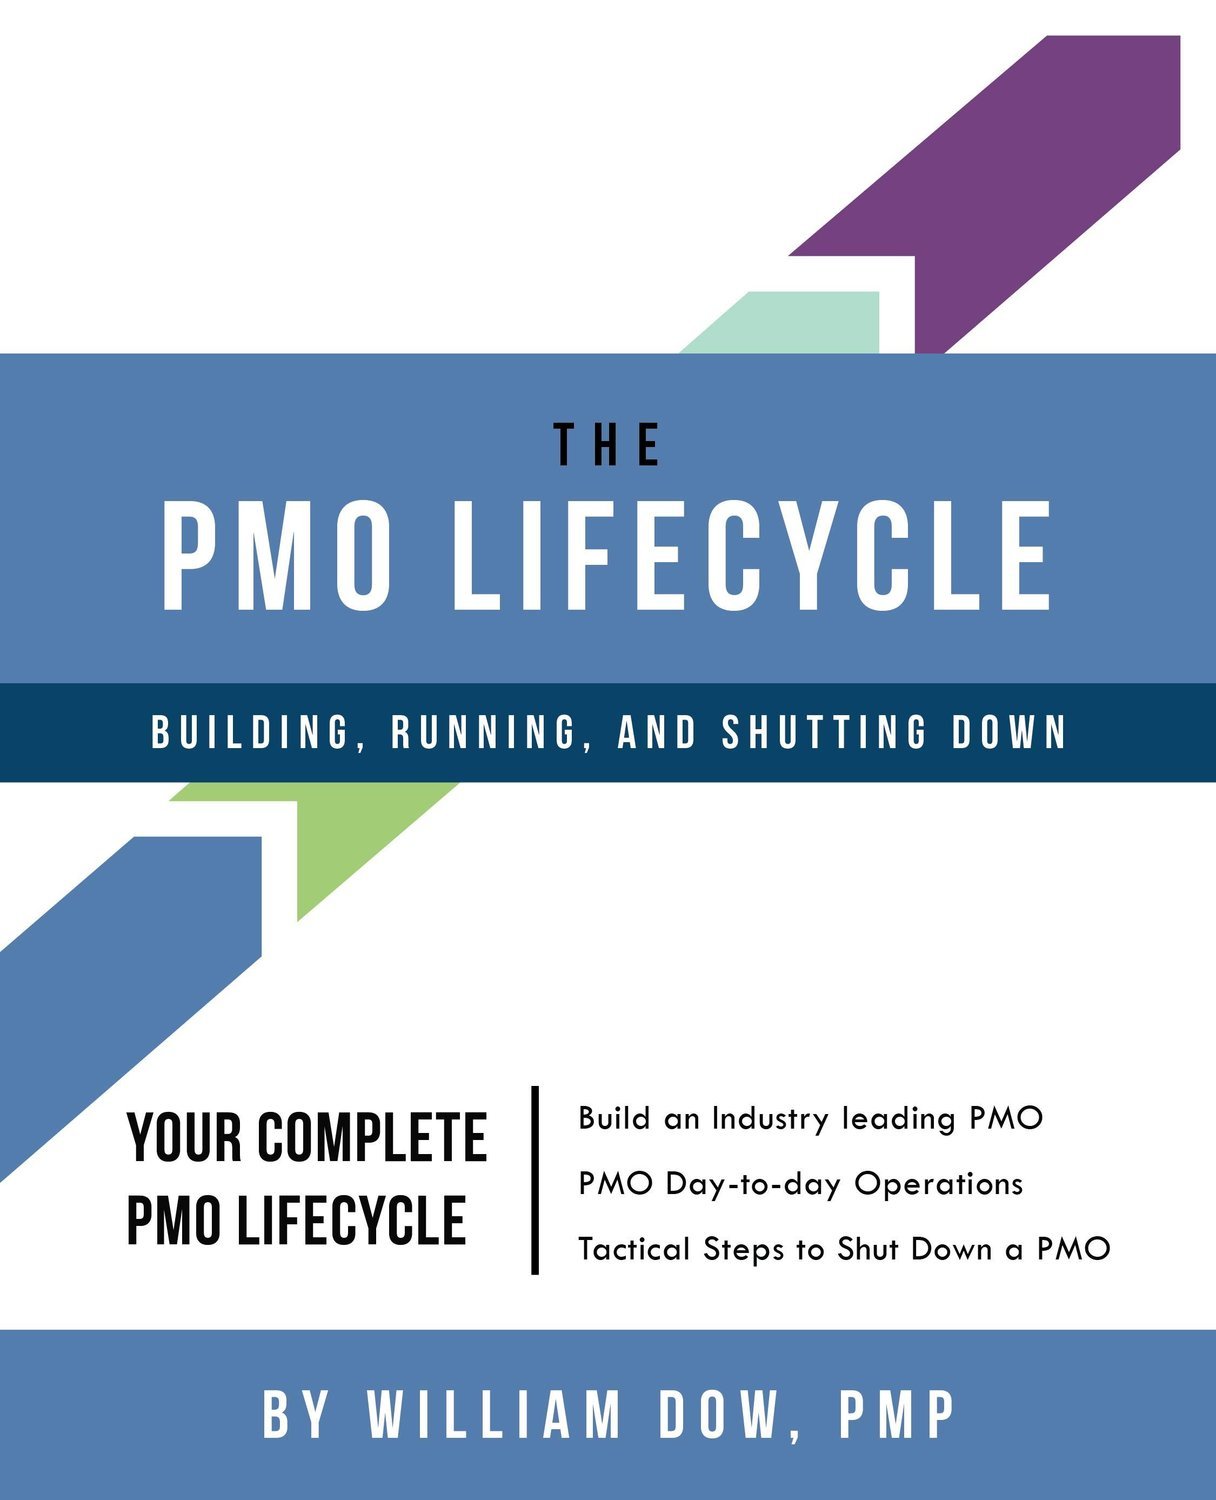 8 Hour Workshop - How to Build, Run & Shutdown a PMO - Author/Instructor Bill Dow, PMP